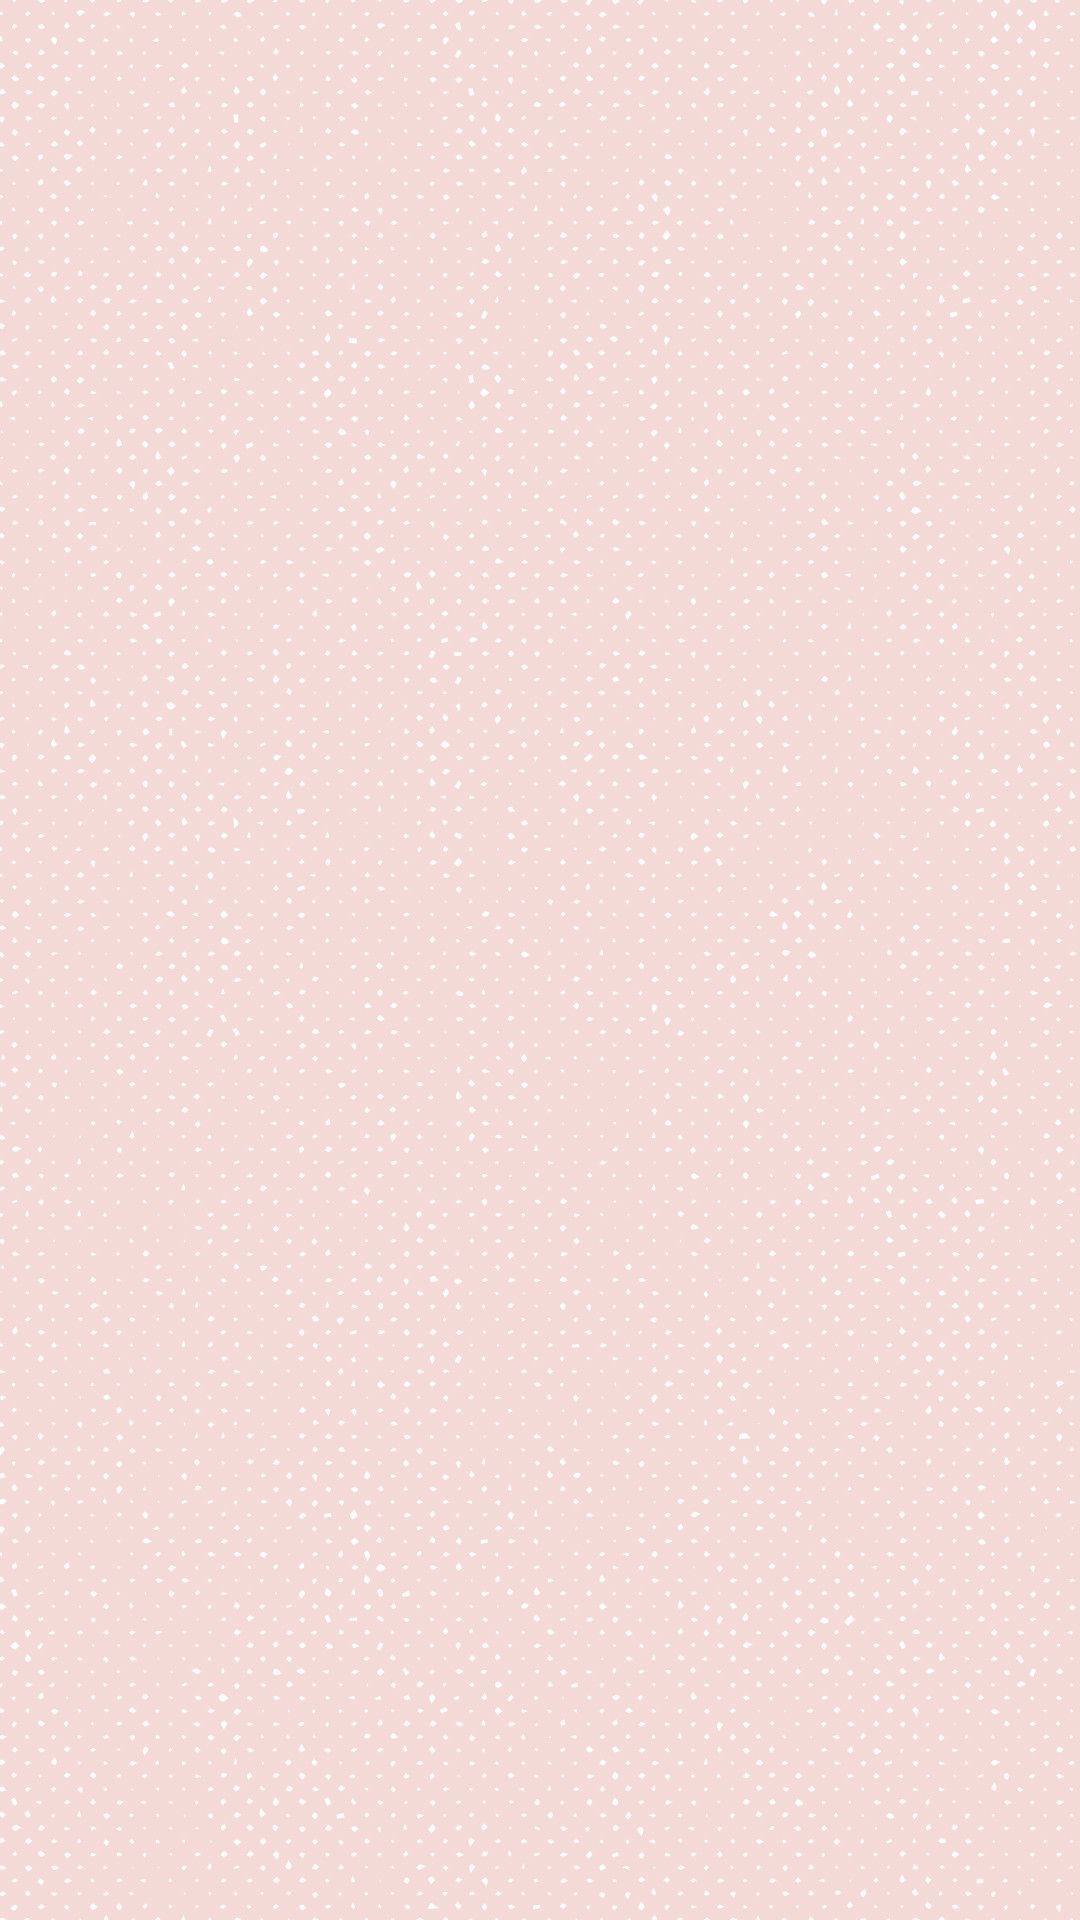 Light Pink Iphone Wallpapers posted by Ryan Simpson